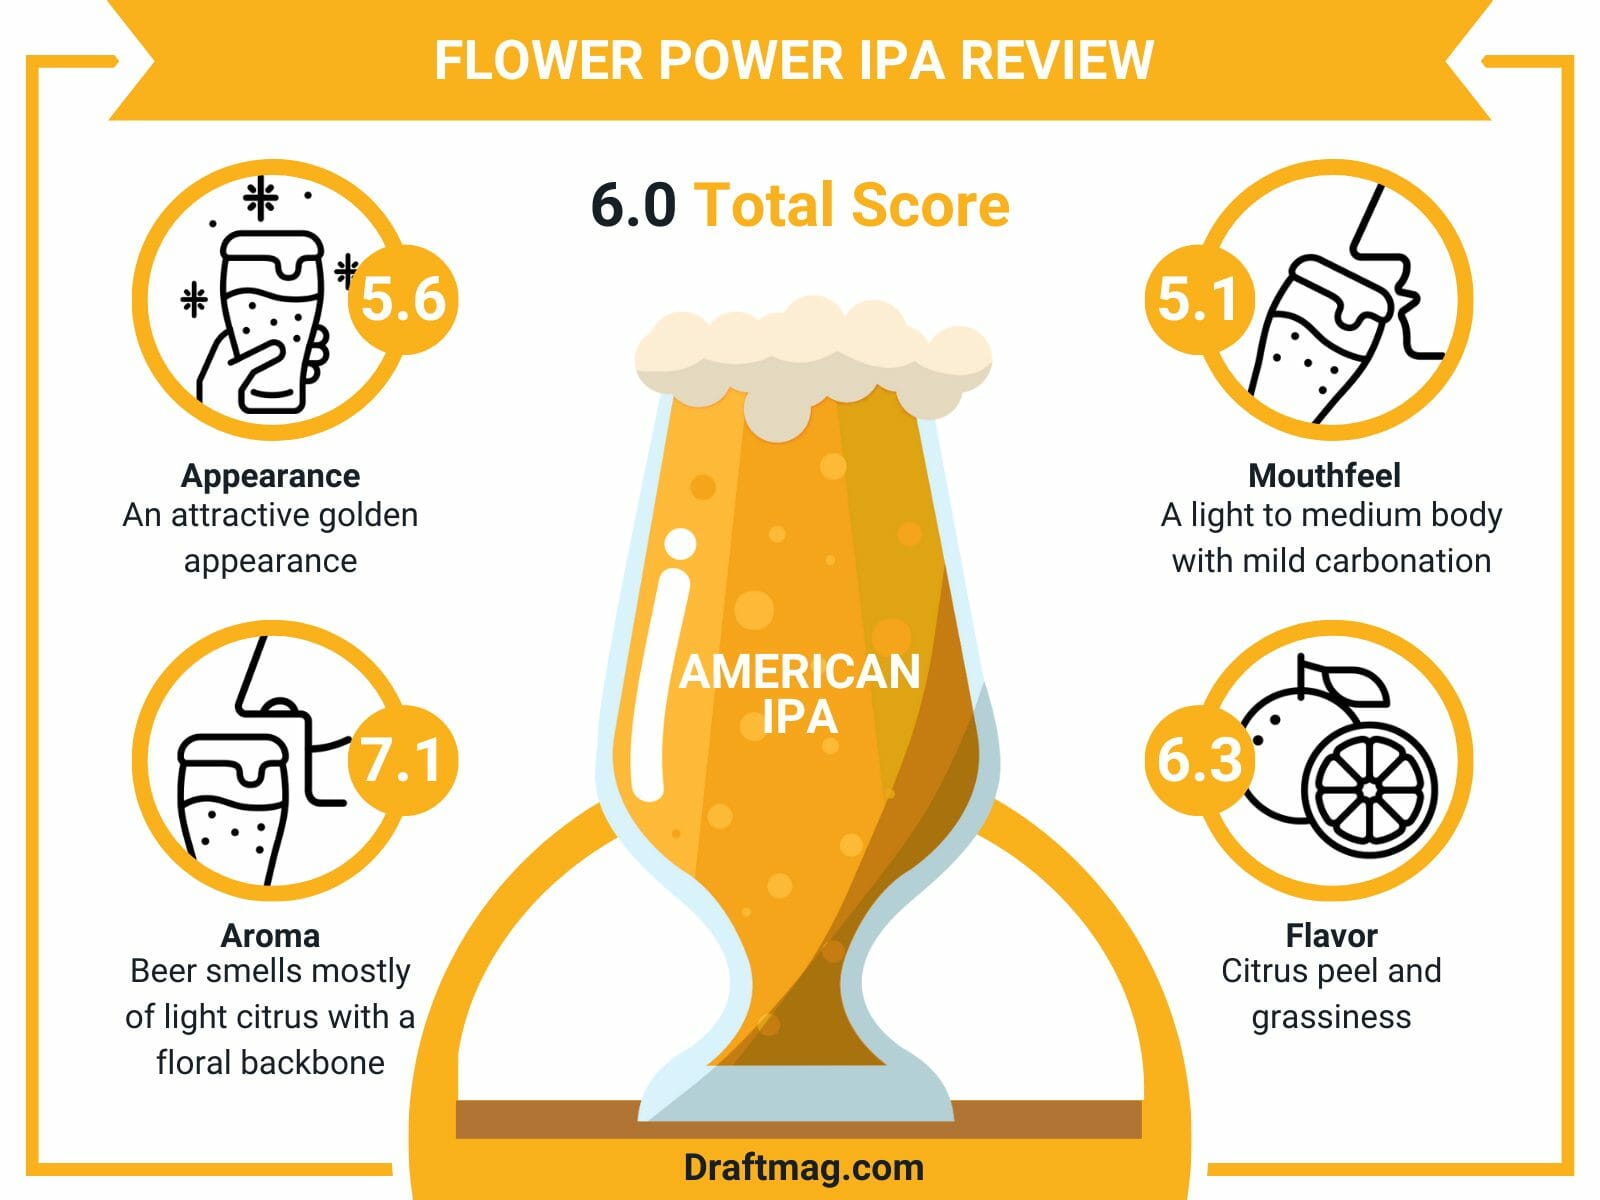 Flower power ipa review infographic